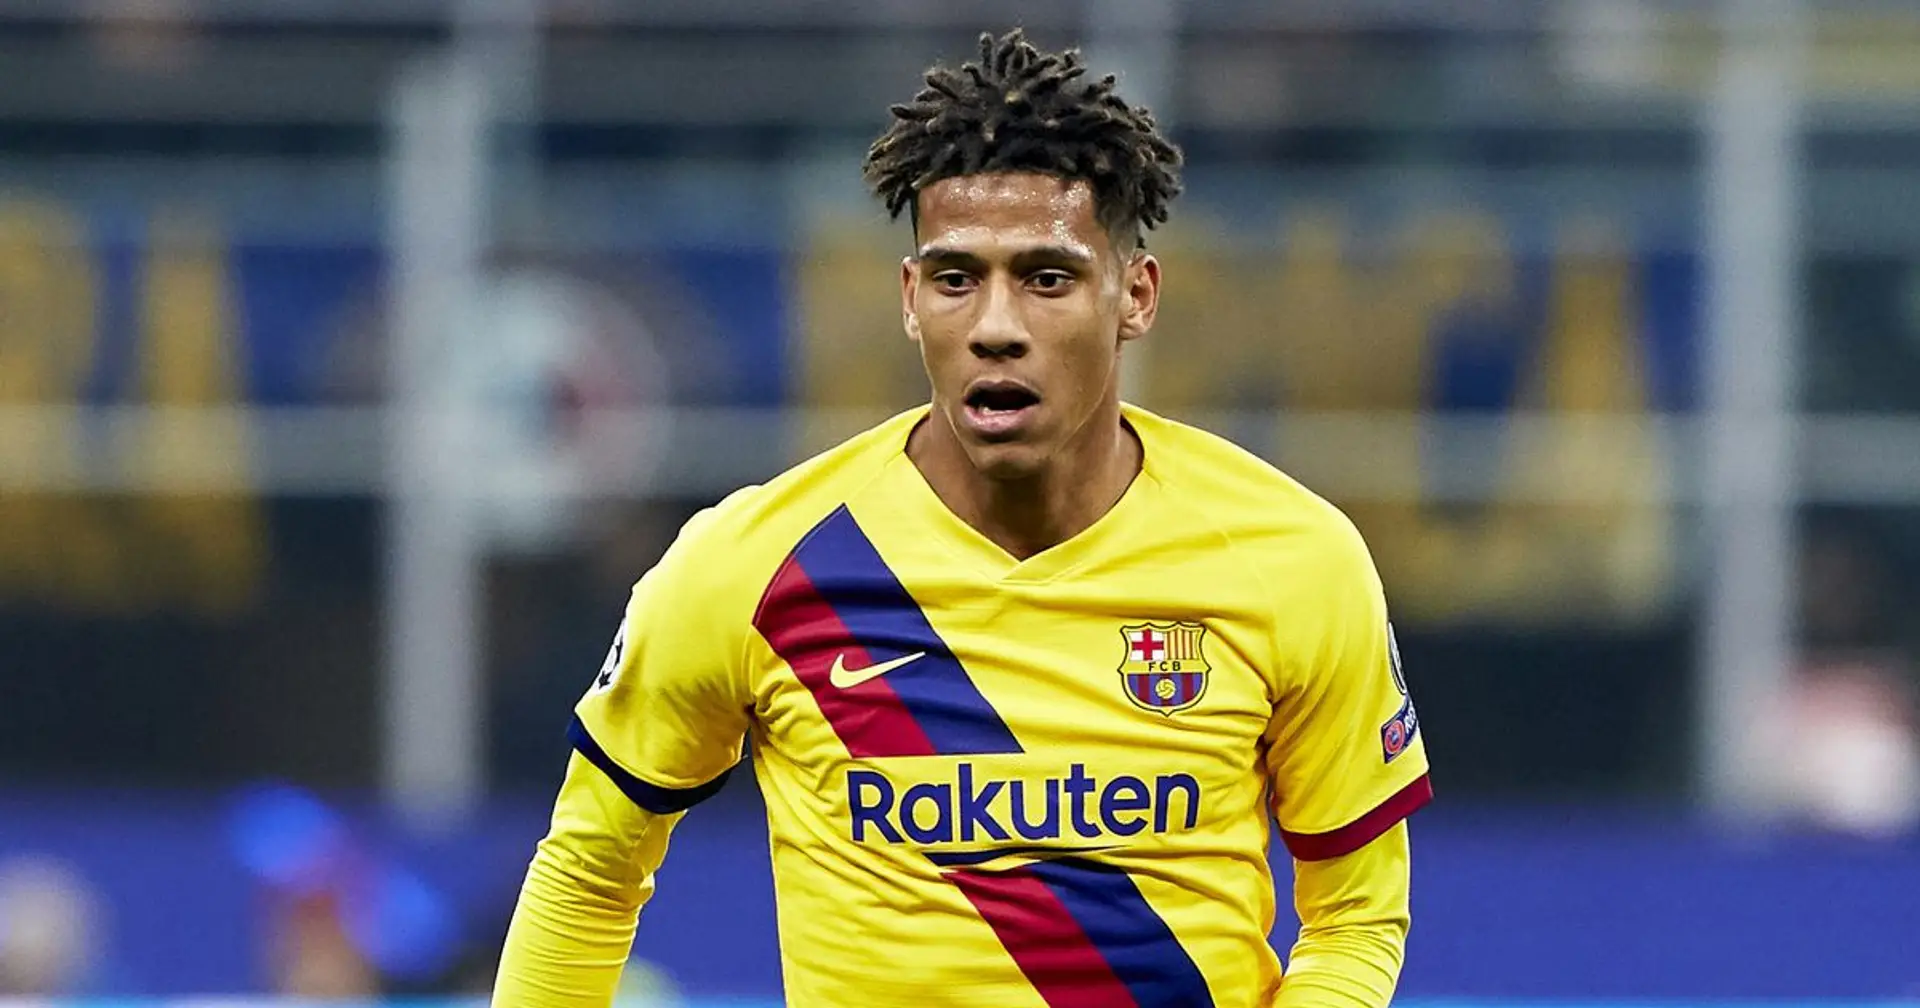 'Stay strong until the end to win the battle': Todibo cheers Barca teammates in tight league race